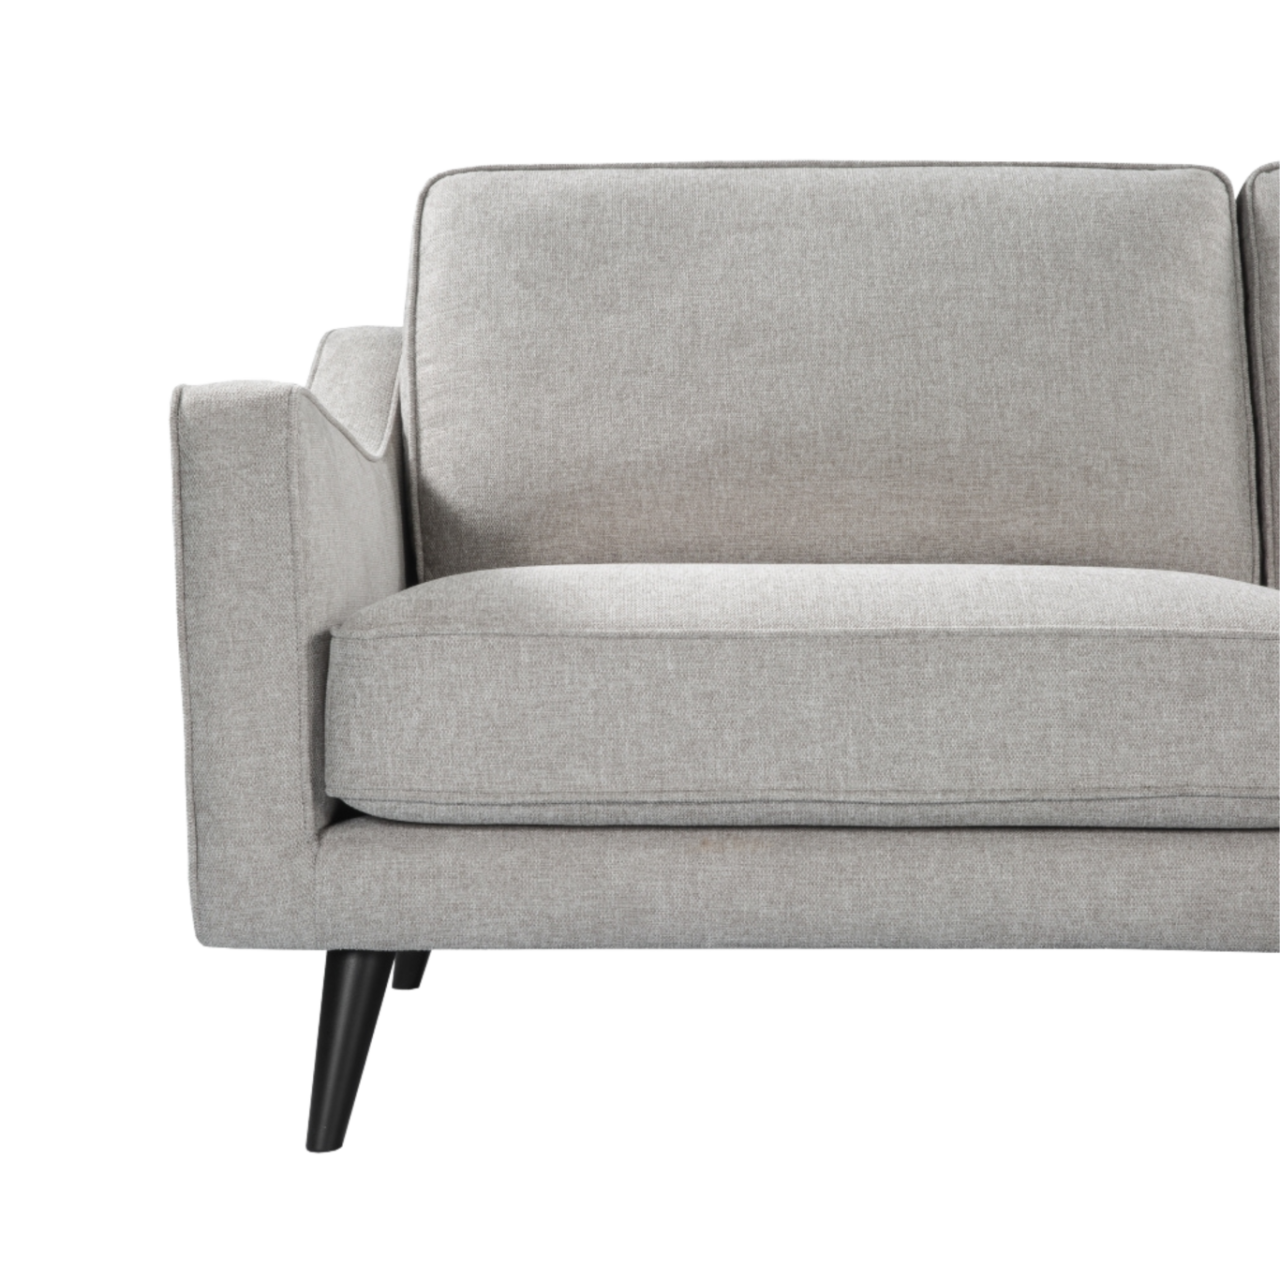 compact, modern 2 seater sofa in stone grey linen